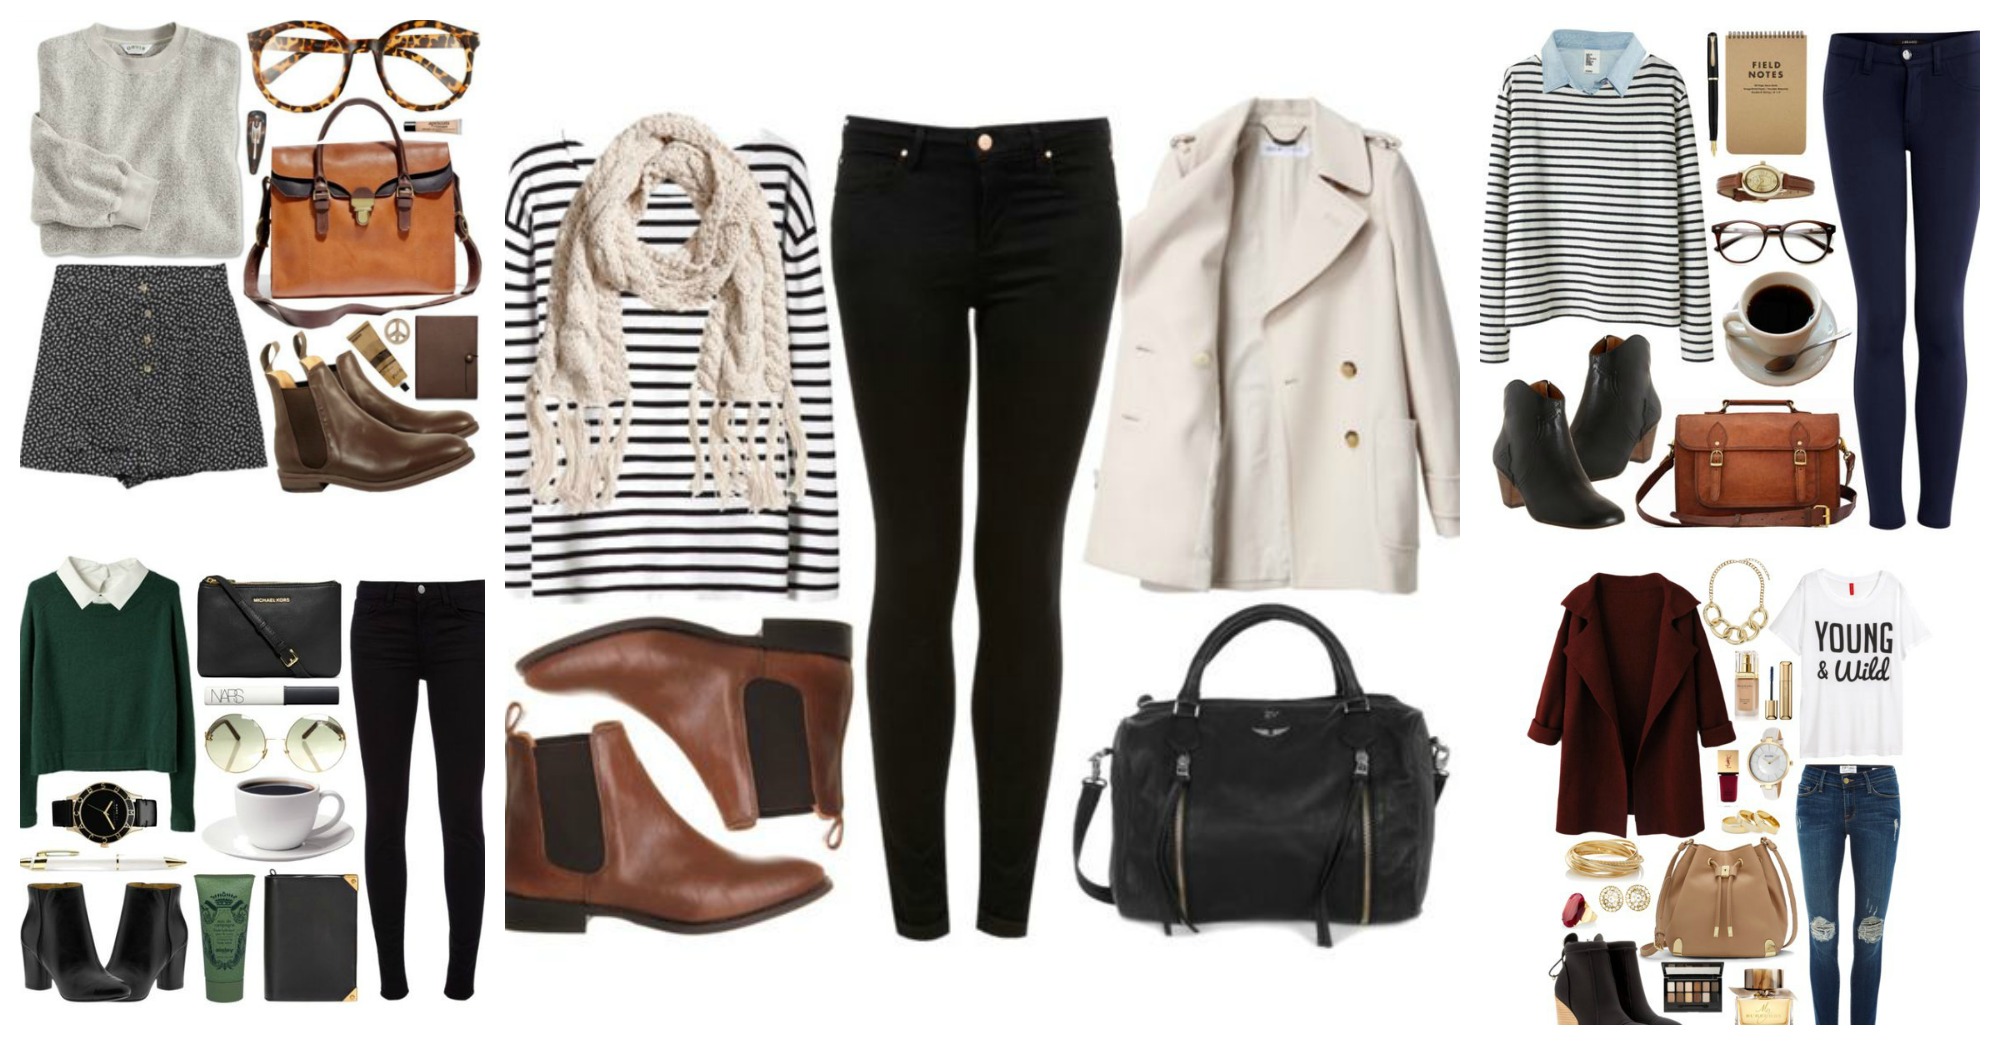 Polyvore Combos With Ankle Boots To Copy This Fall - fashionsy.com